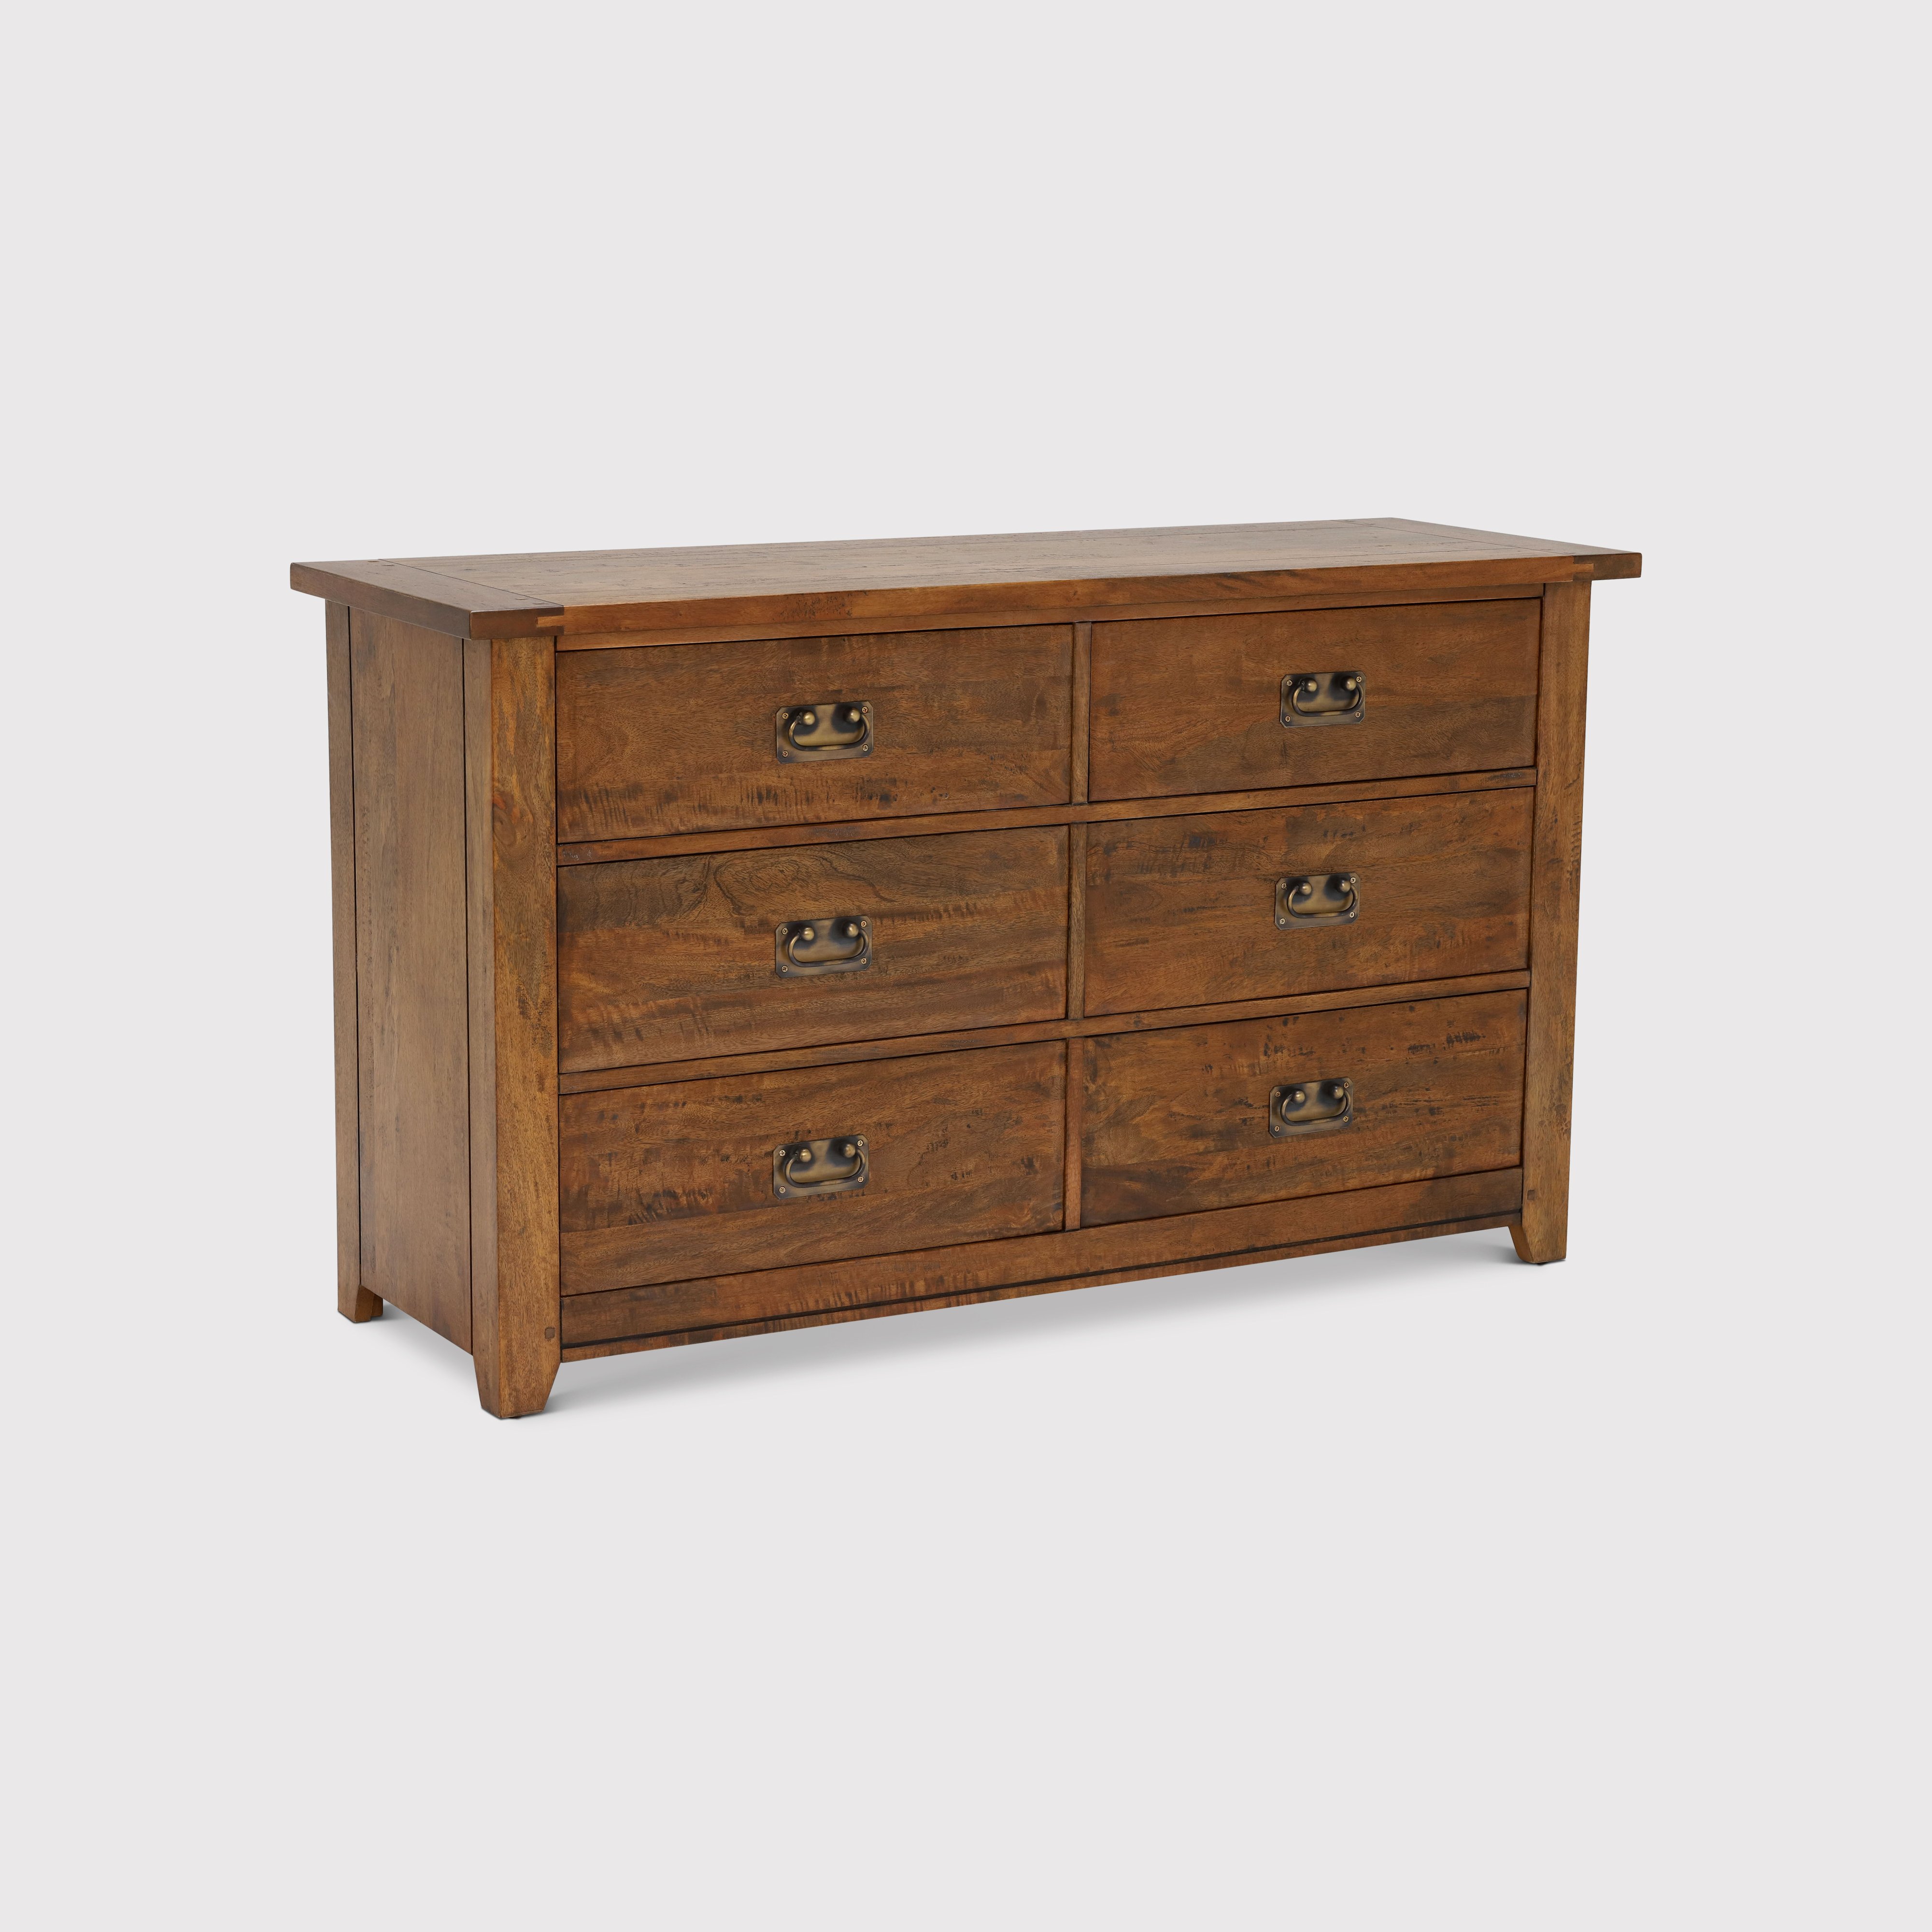 New Frontier 6 Drawer Chest, Mango Wood | Barker & Stonehouse